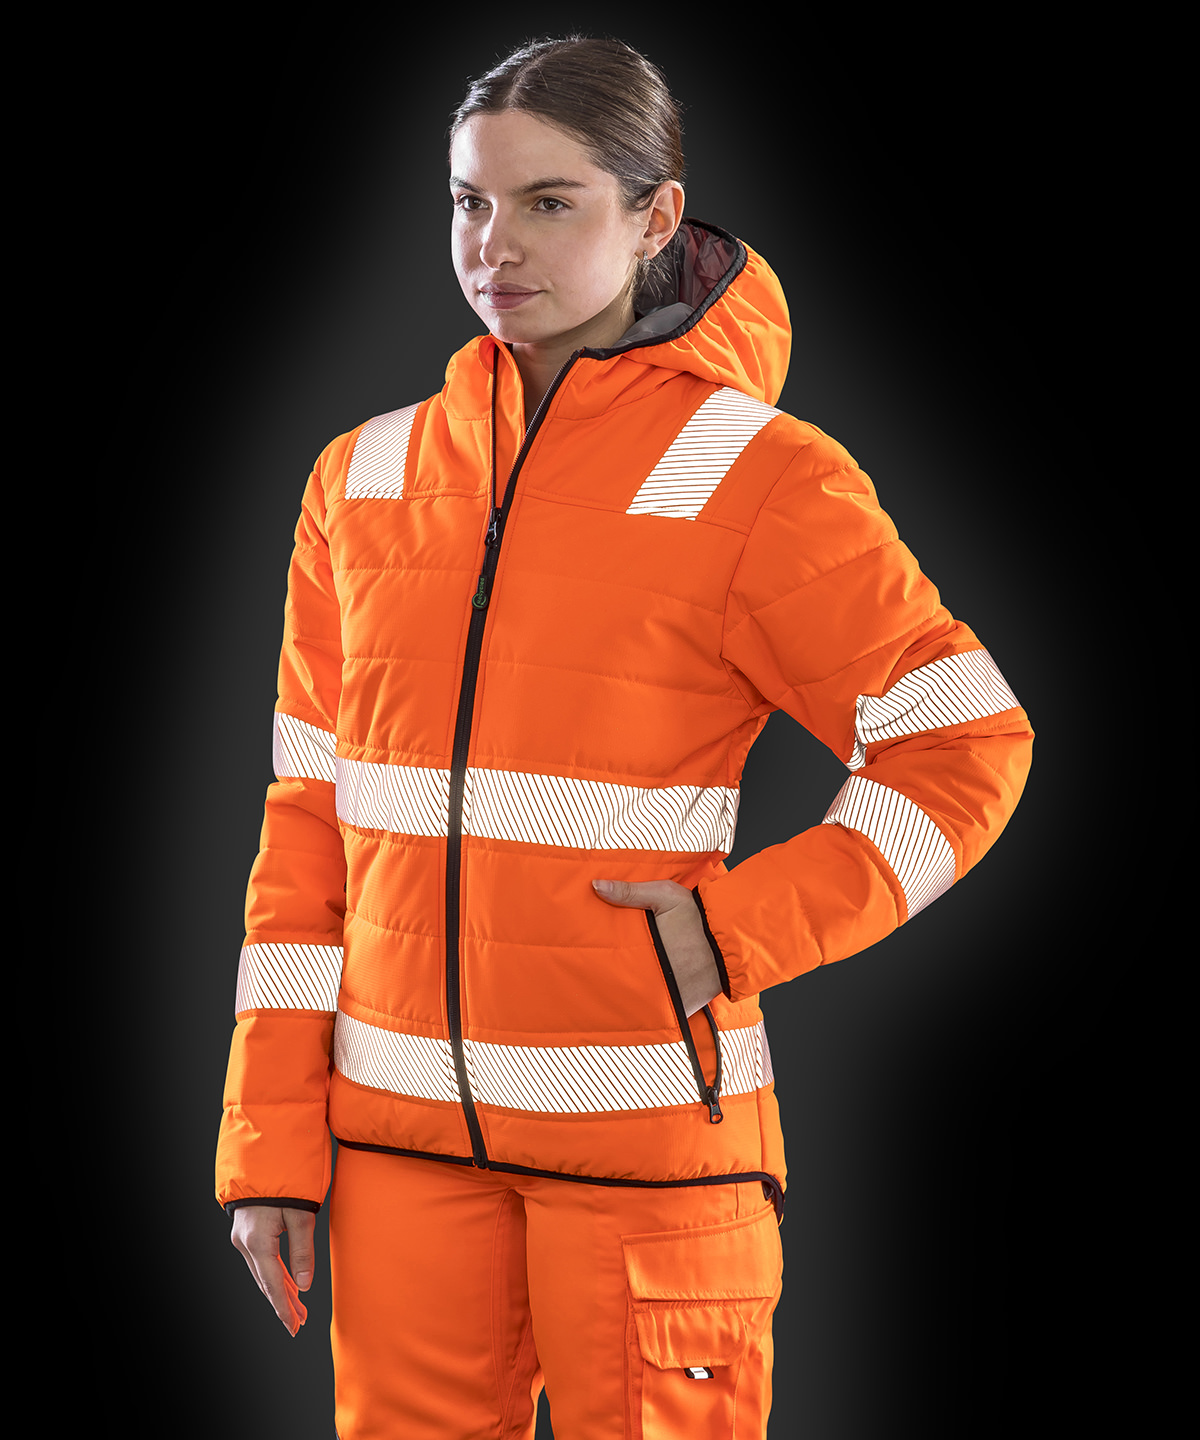 Recycled ripstop padded safety jacket